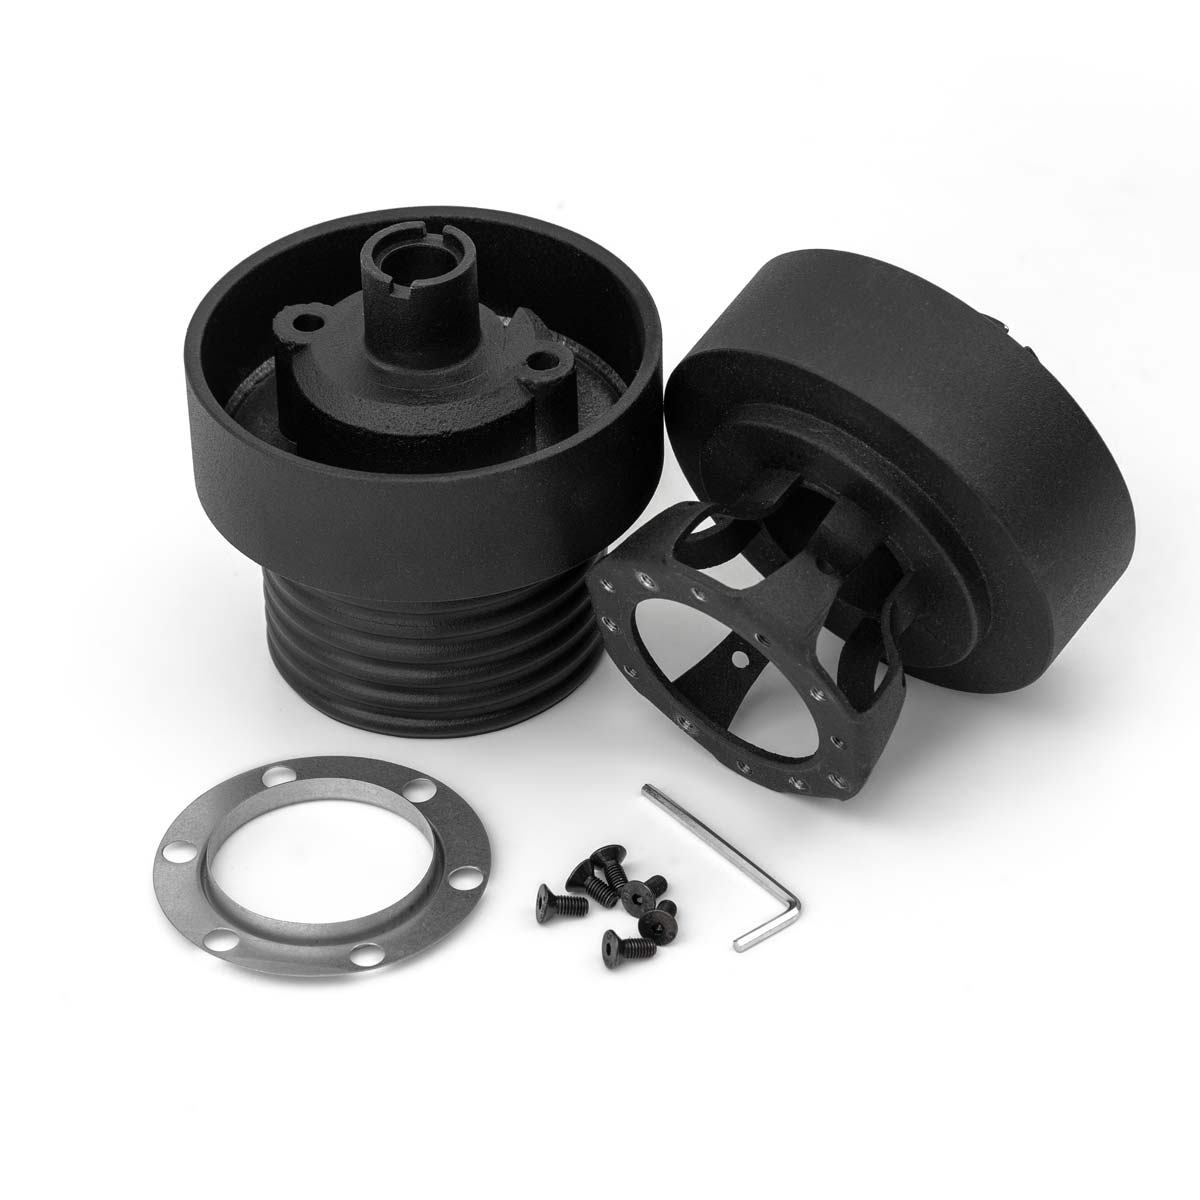 LUISI steering wheel hub Fiat Fiorino Pick-Up up to 1992 (TÜV-compliant deformable / 6x74mm 6x70mm)